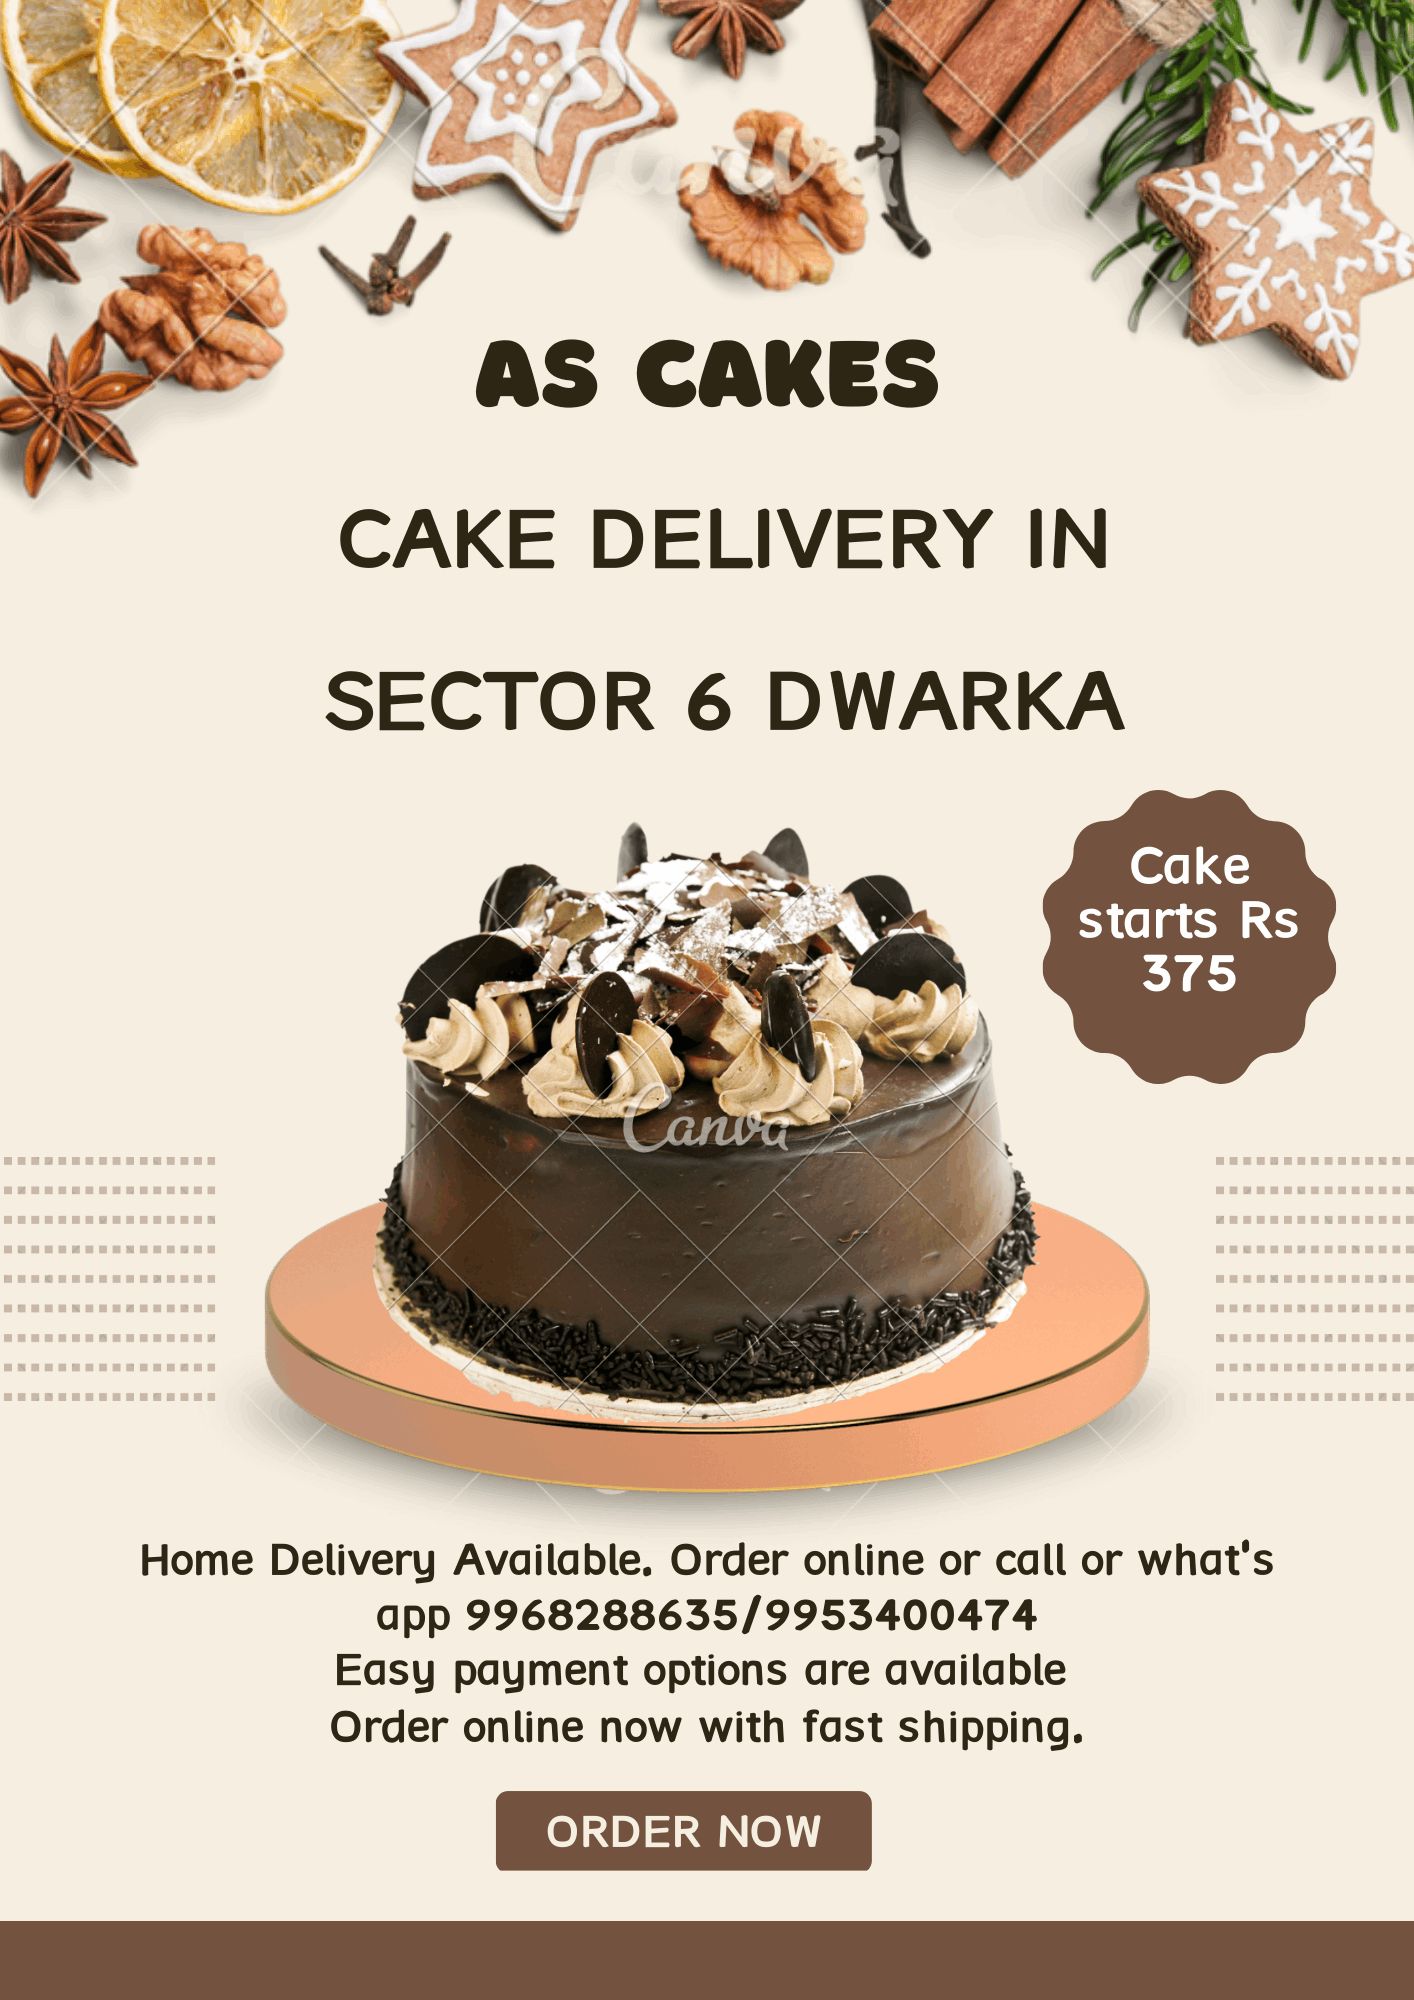 AS Cakes - Cake Delivery In Sector 6 Dwarka